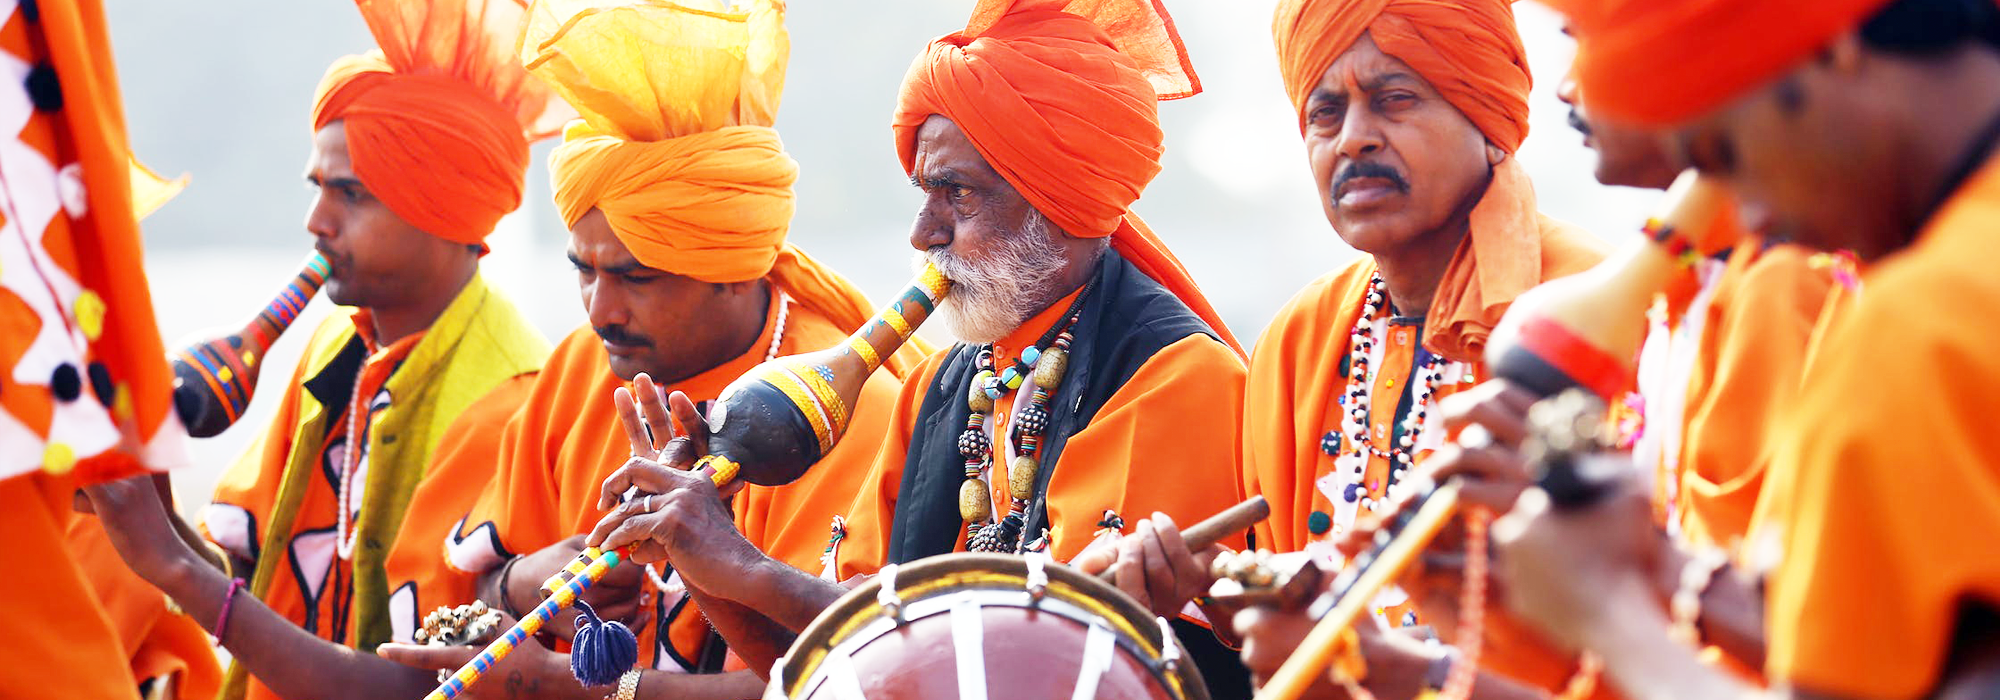 Musicians playing the been, a wind instrument